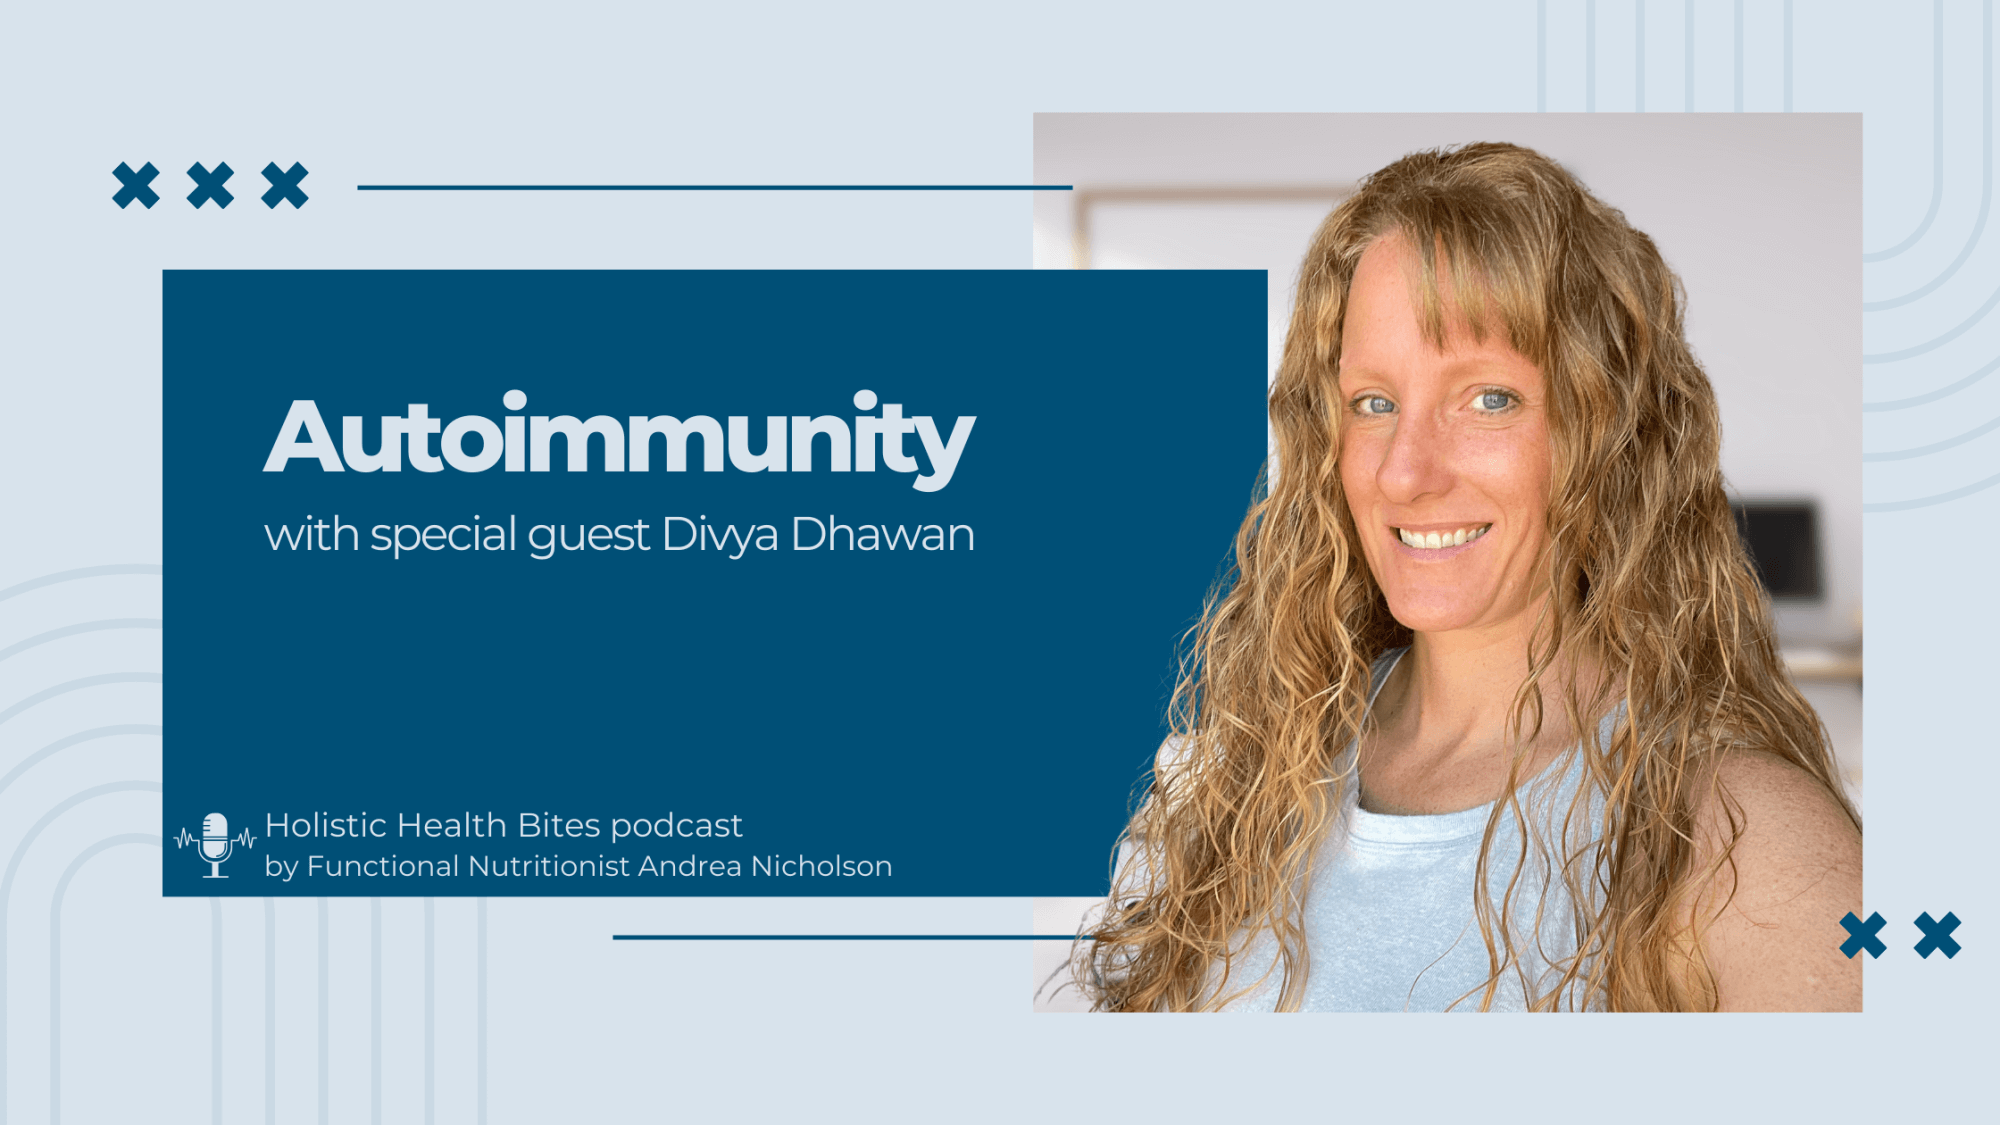 Troubleshooting Autoimmunity with Divya Dhawan on the Holistic Health Bites podcast with Functional Nutritionist Andrea Nicholson